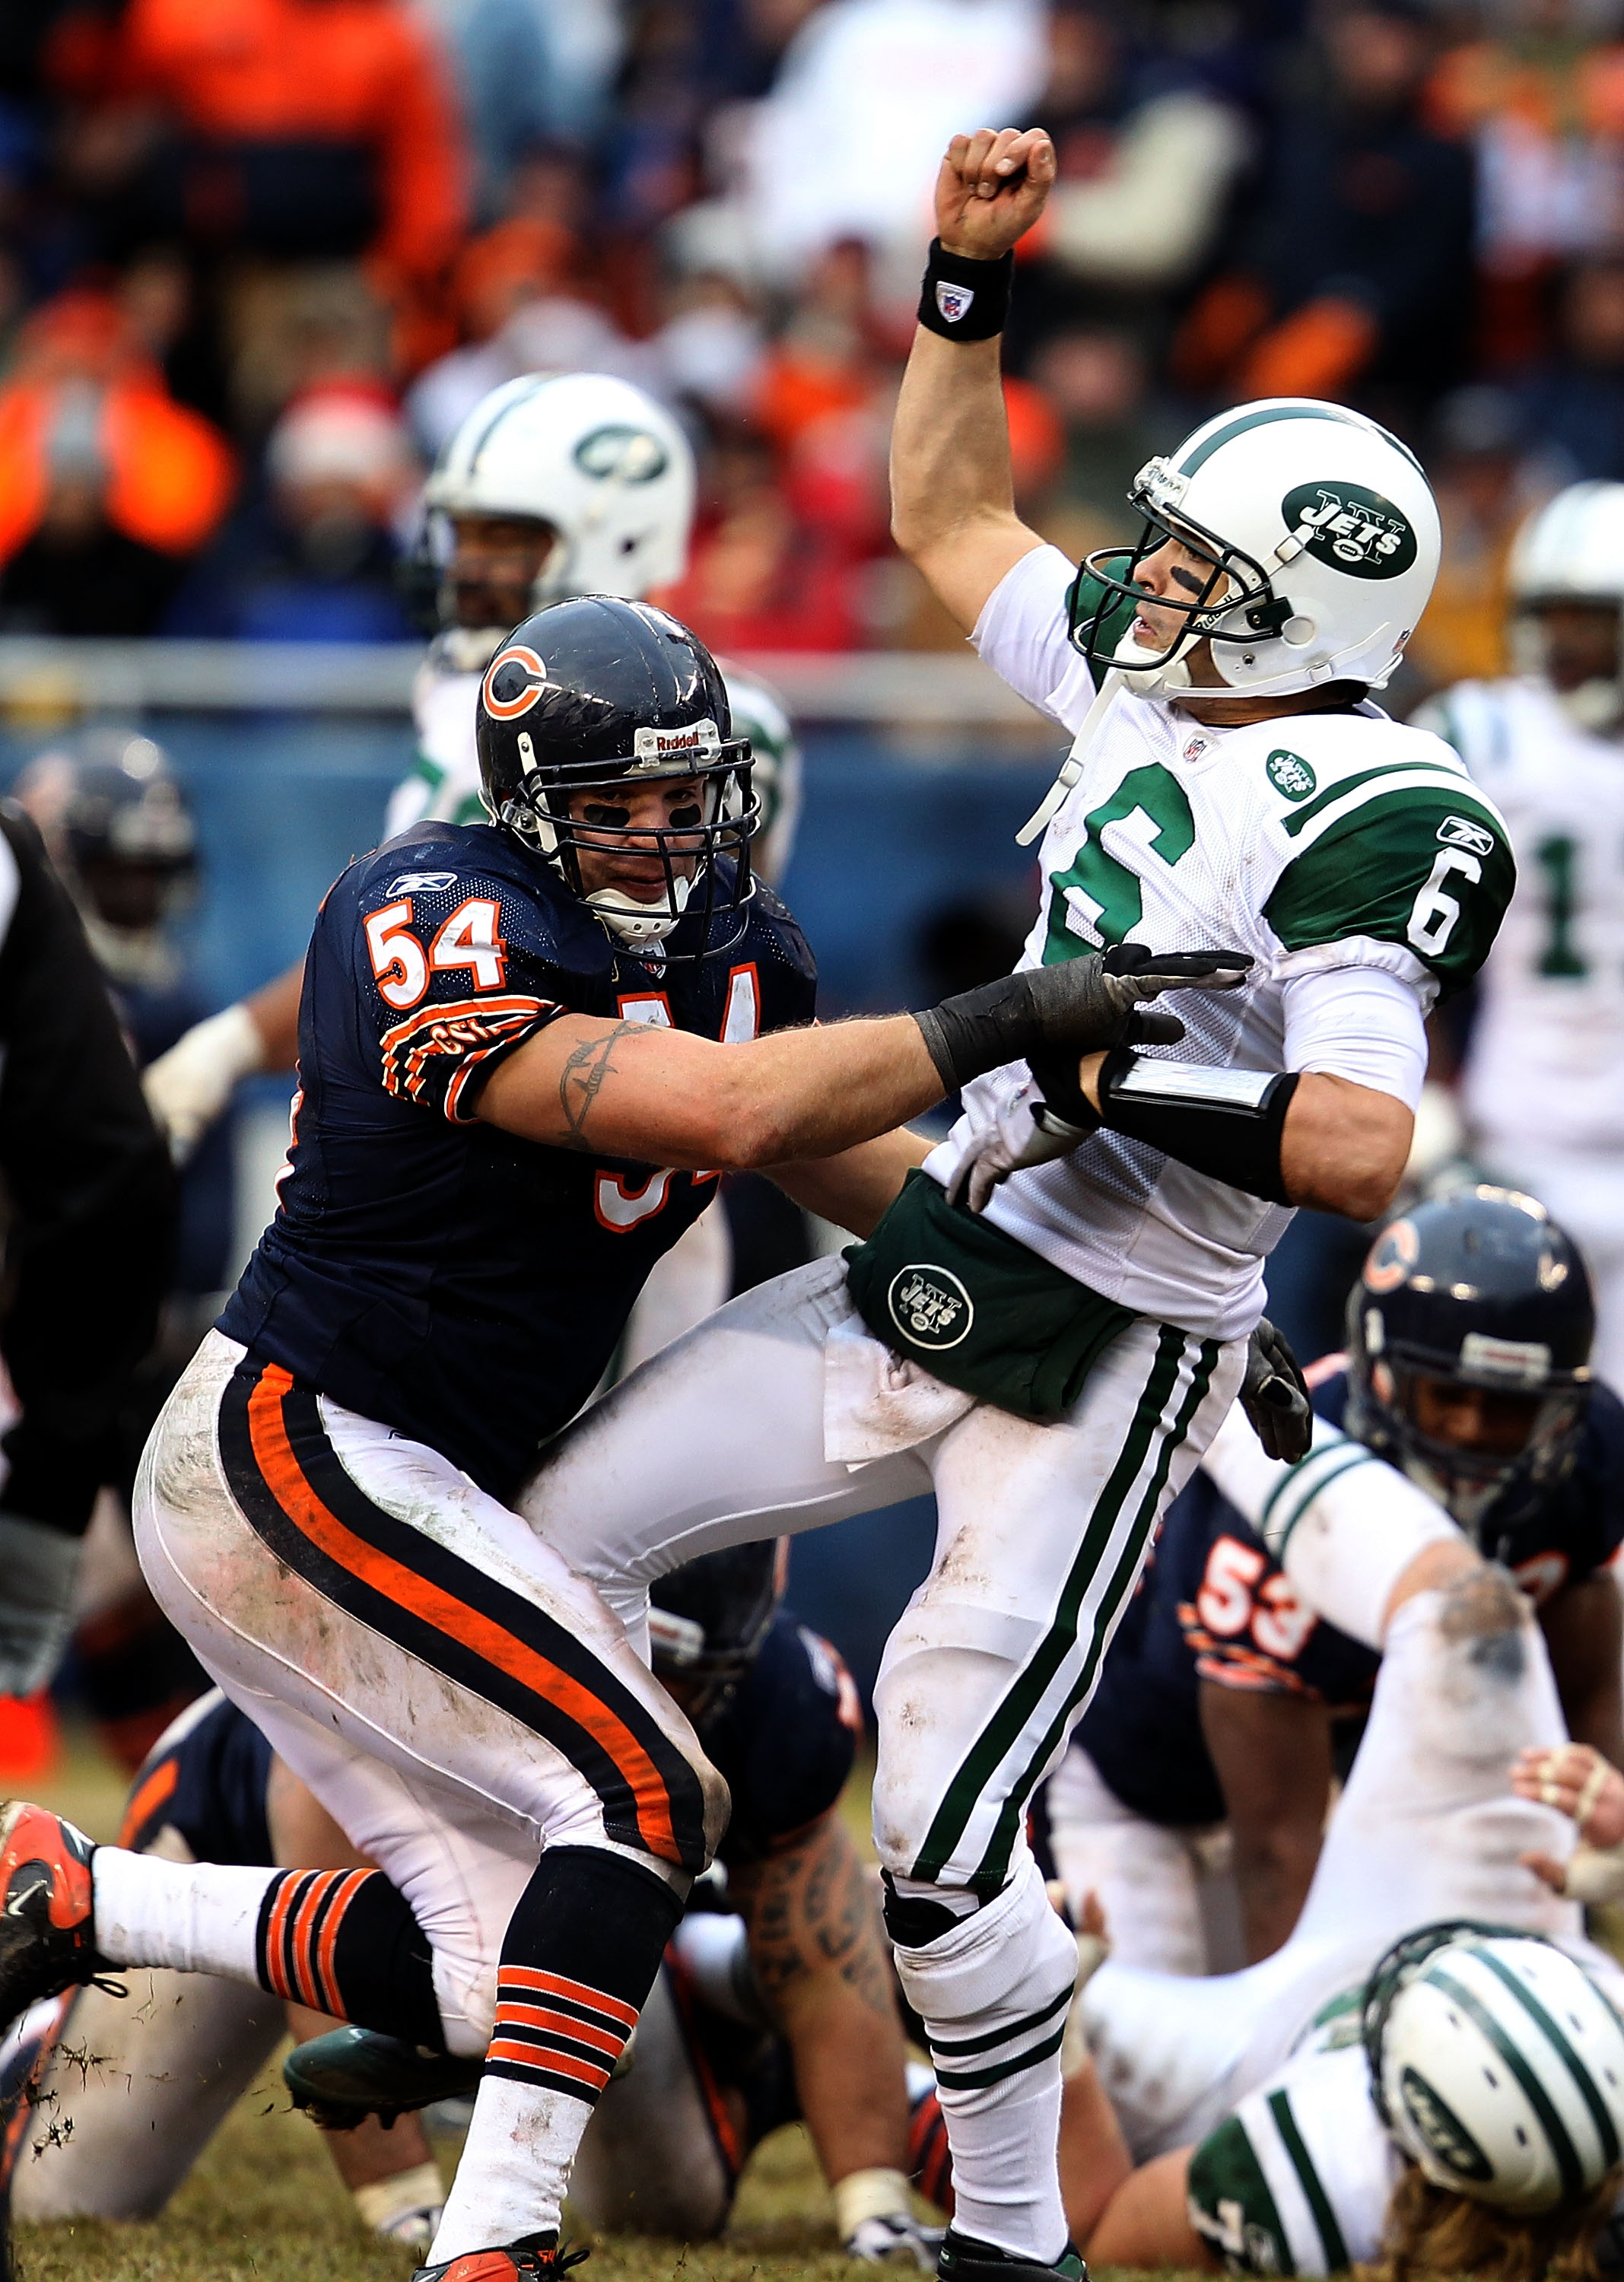 CHICAGO, IL - DECEMBER 26: Brian Urlacher #54 of the Chicago Bears hits Mark Sanchez #6 of the New York Jets at Soldier Field on December 26, 2010 in Chicago, Illinois. The Bears defeated the Jets 38-34.  (Photo by Jonathan Daniel/Getty Images)